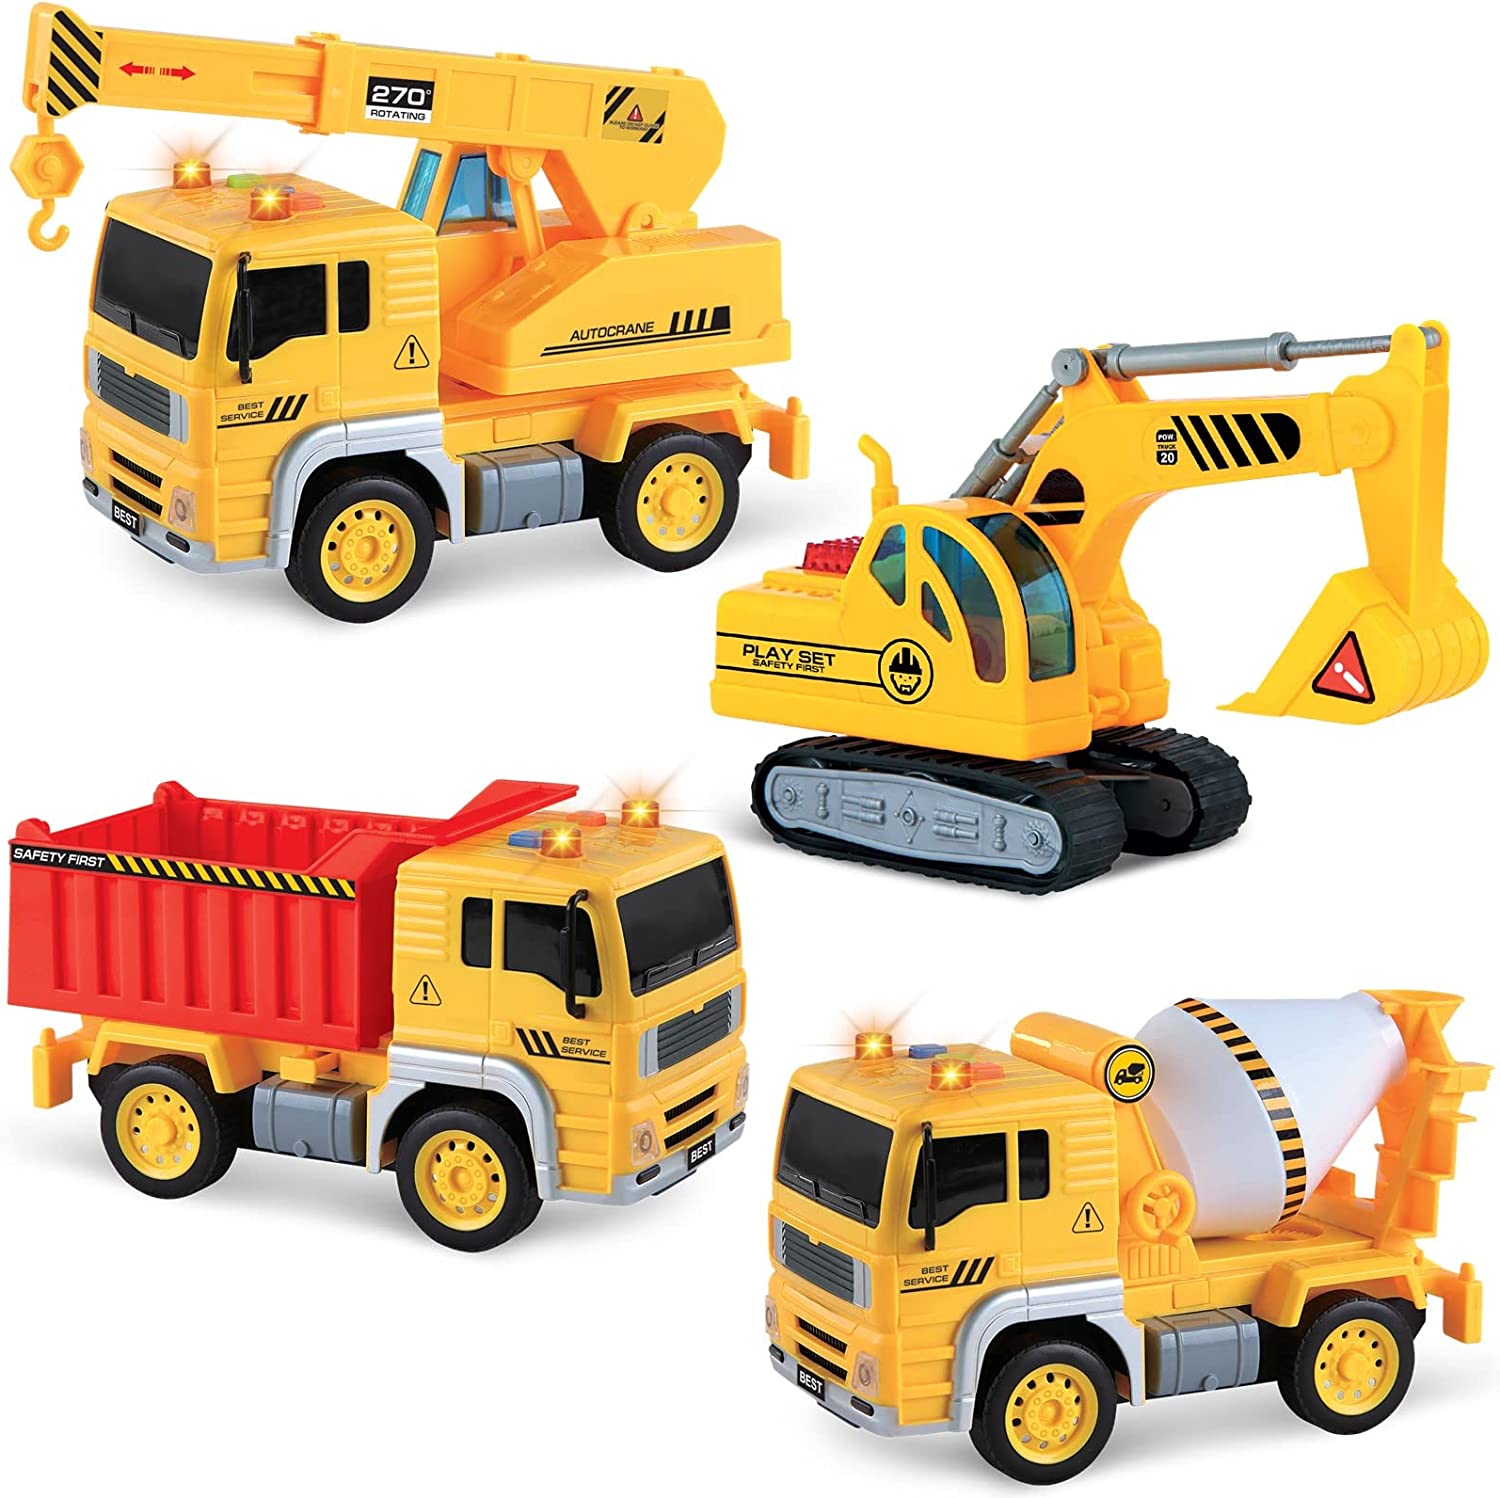 Vokodo 4 Pack Construction Squad Vehicle Bundle Toy Playsets, Friction Power Vehicles with Light and Sound, Includes Crane, Dump Truck, Excavator Car, Cement Mixer, Pretend Play Toys Toddler Kids Boys